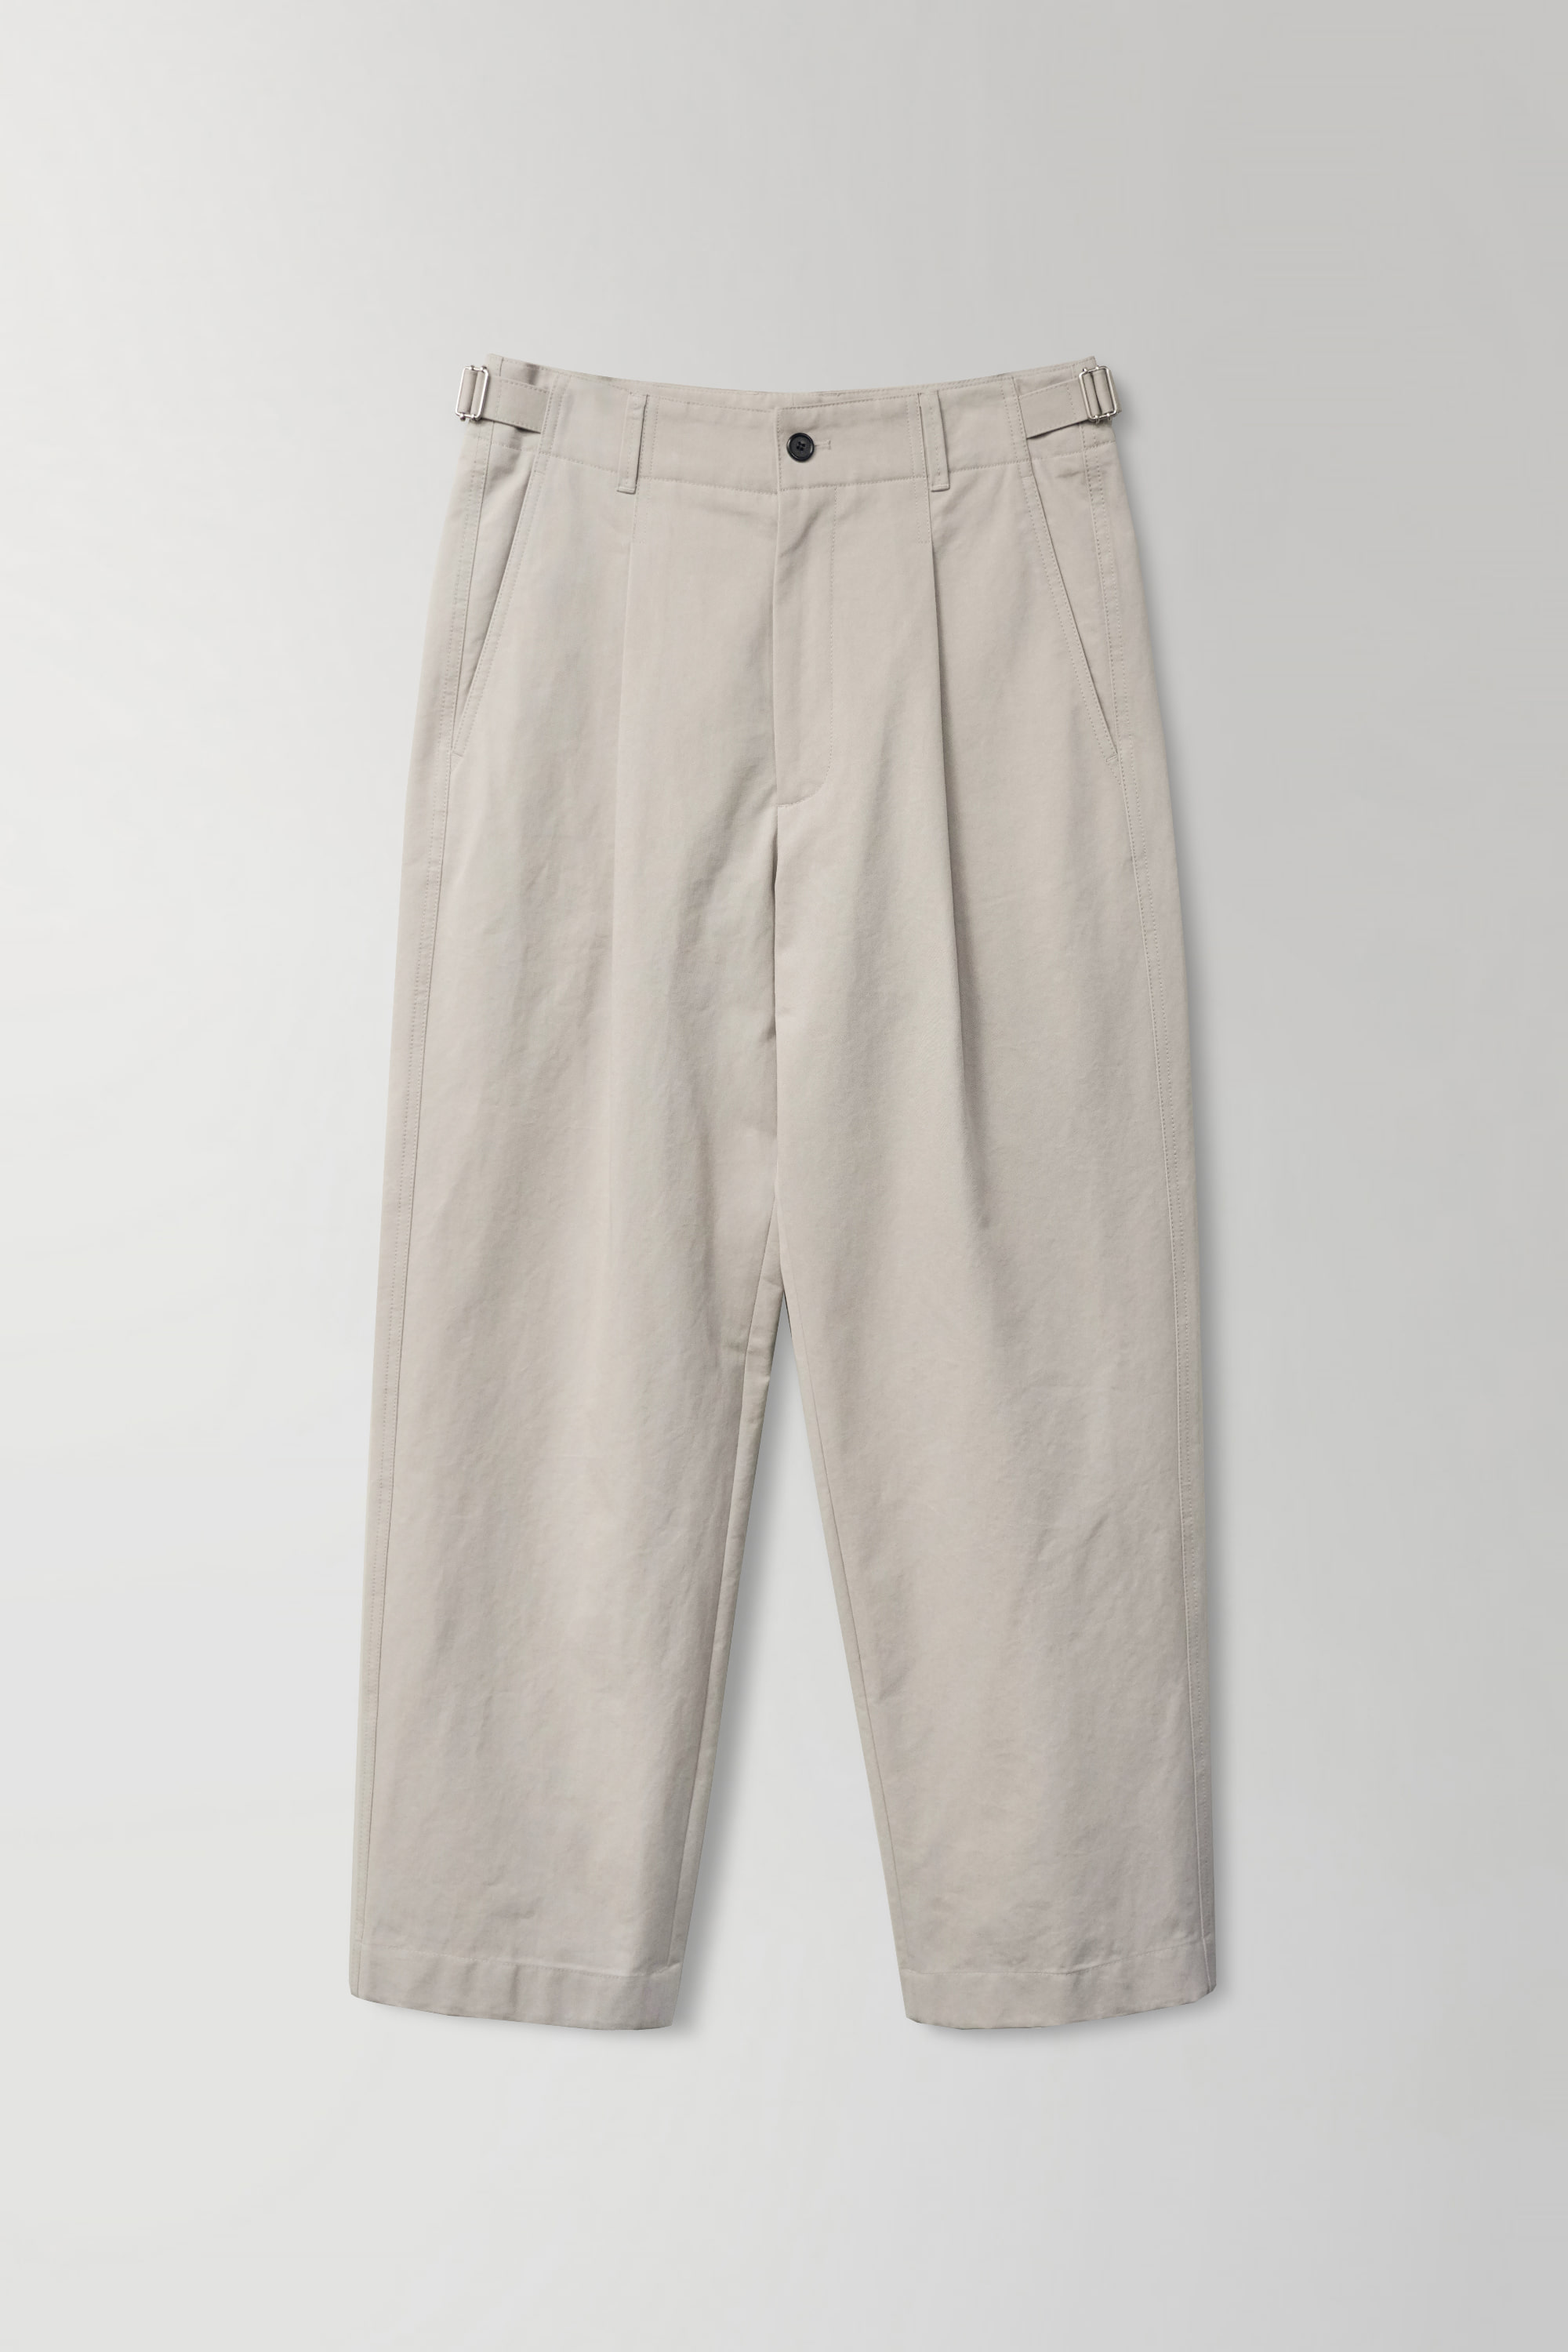 STRUCTURED CHINO PANTS - BEIGE GREY